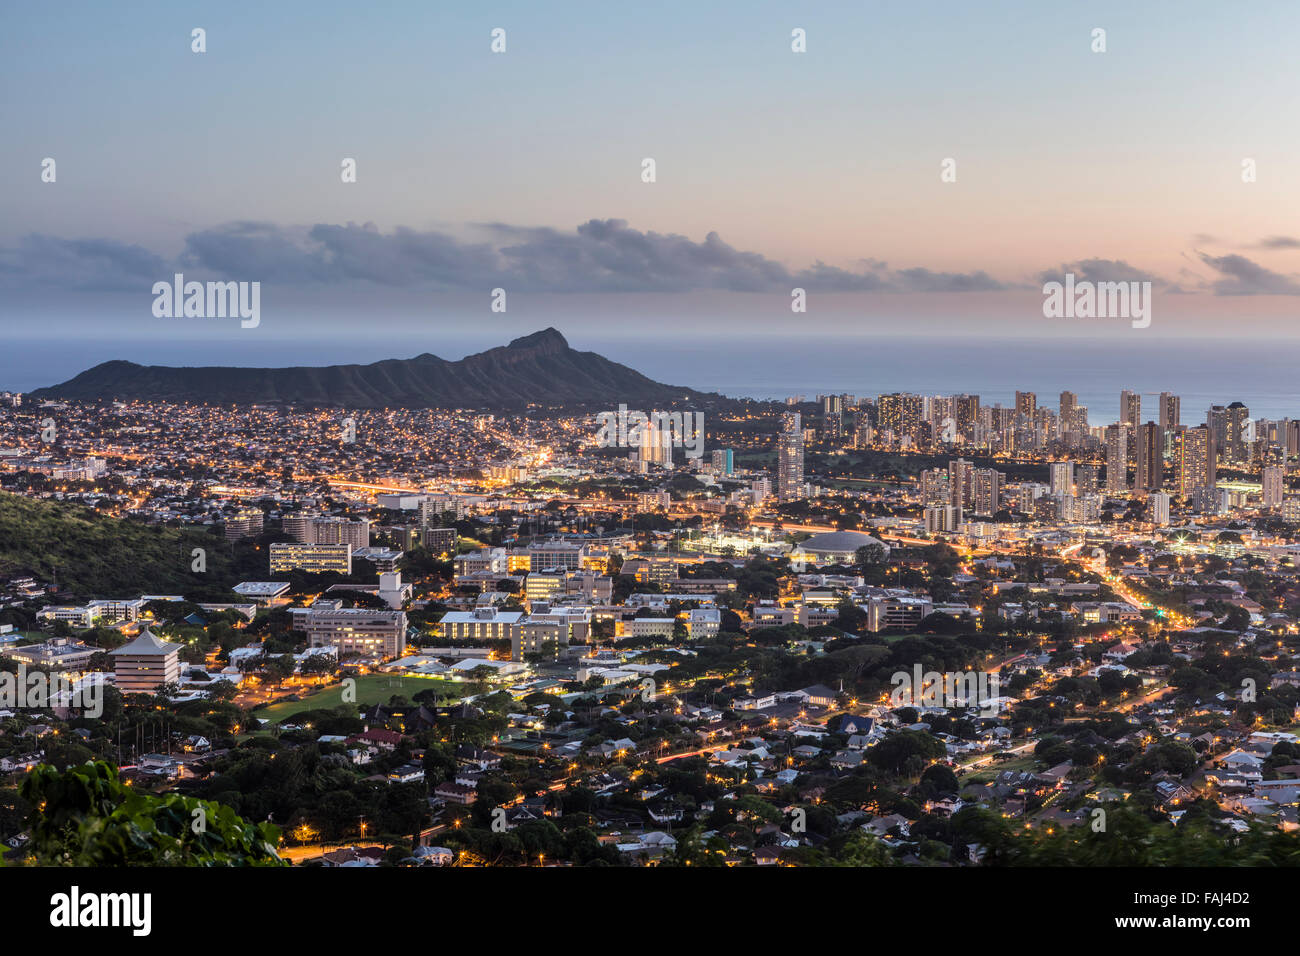 A view of Waikiki and Diamond Head from Tantulus drive at dusk. Stock Photo